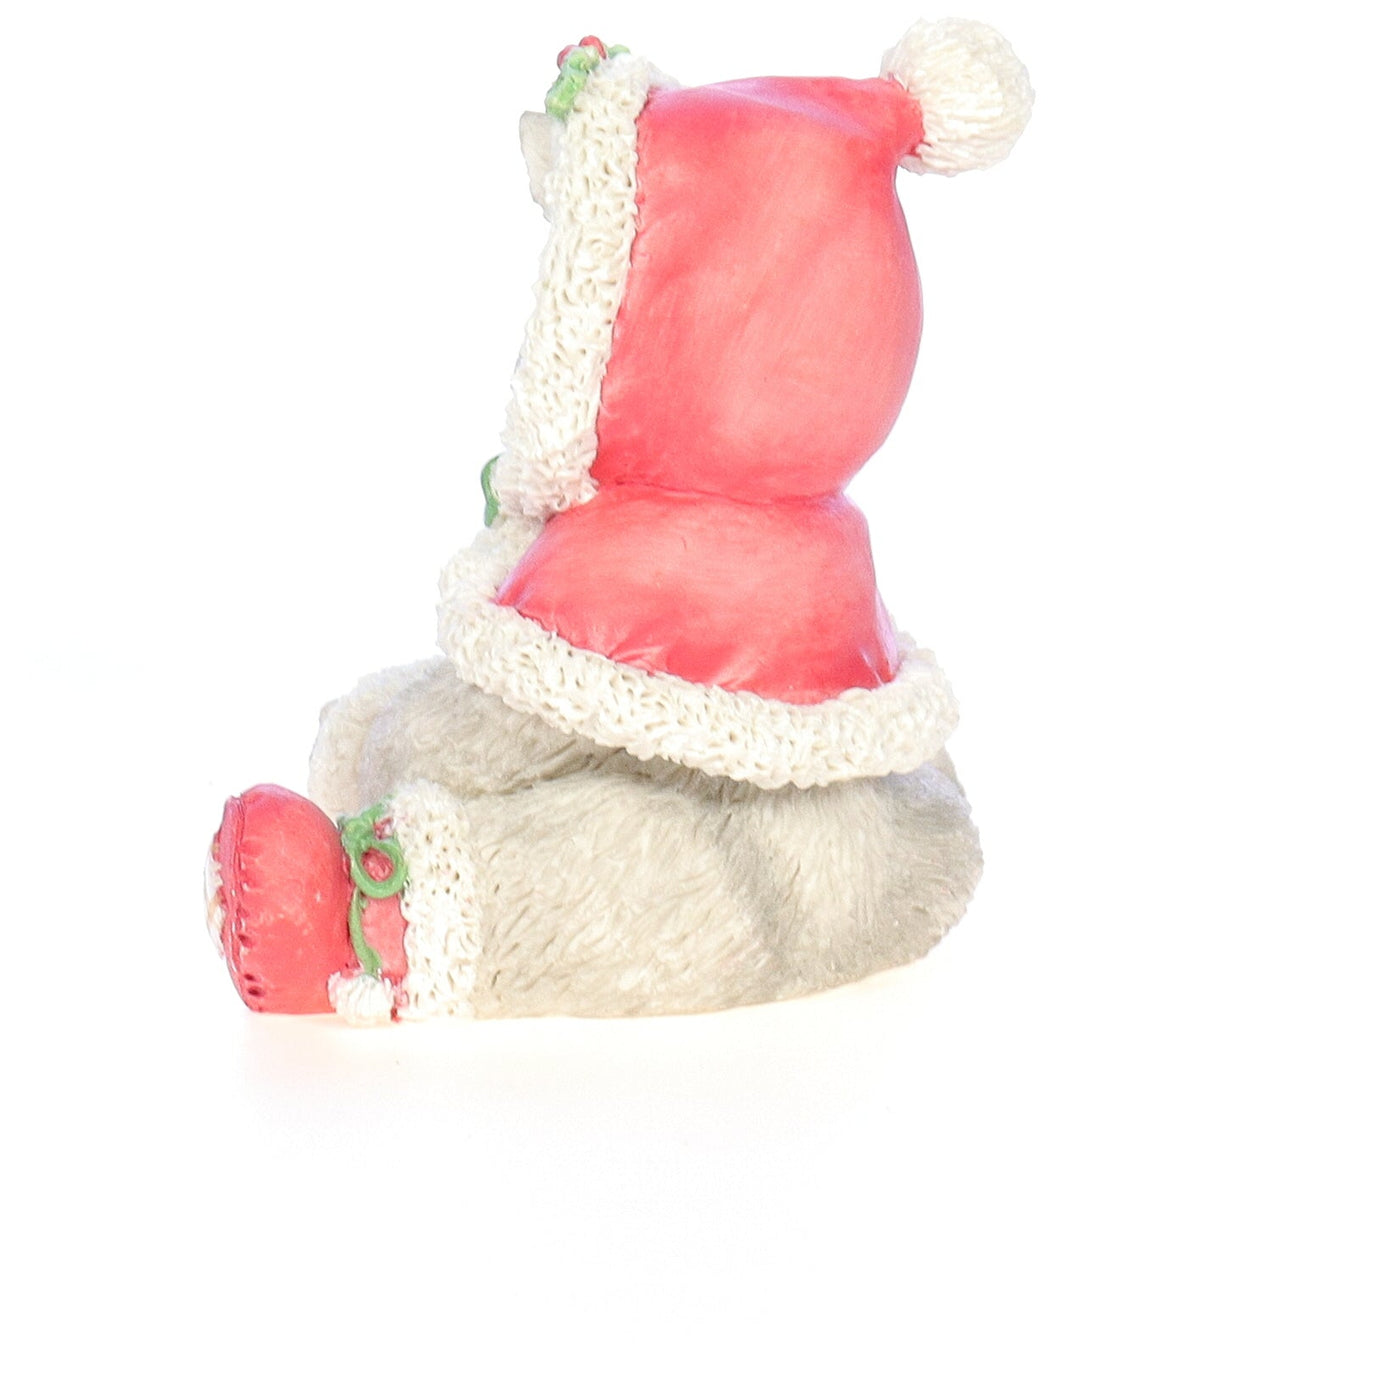 Calico_Kittens_Wrapped_in_The_Warmth_Of_Friendship_Christmas_Figurine_1993